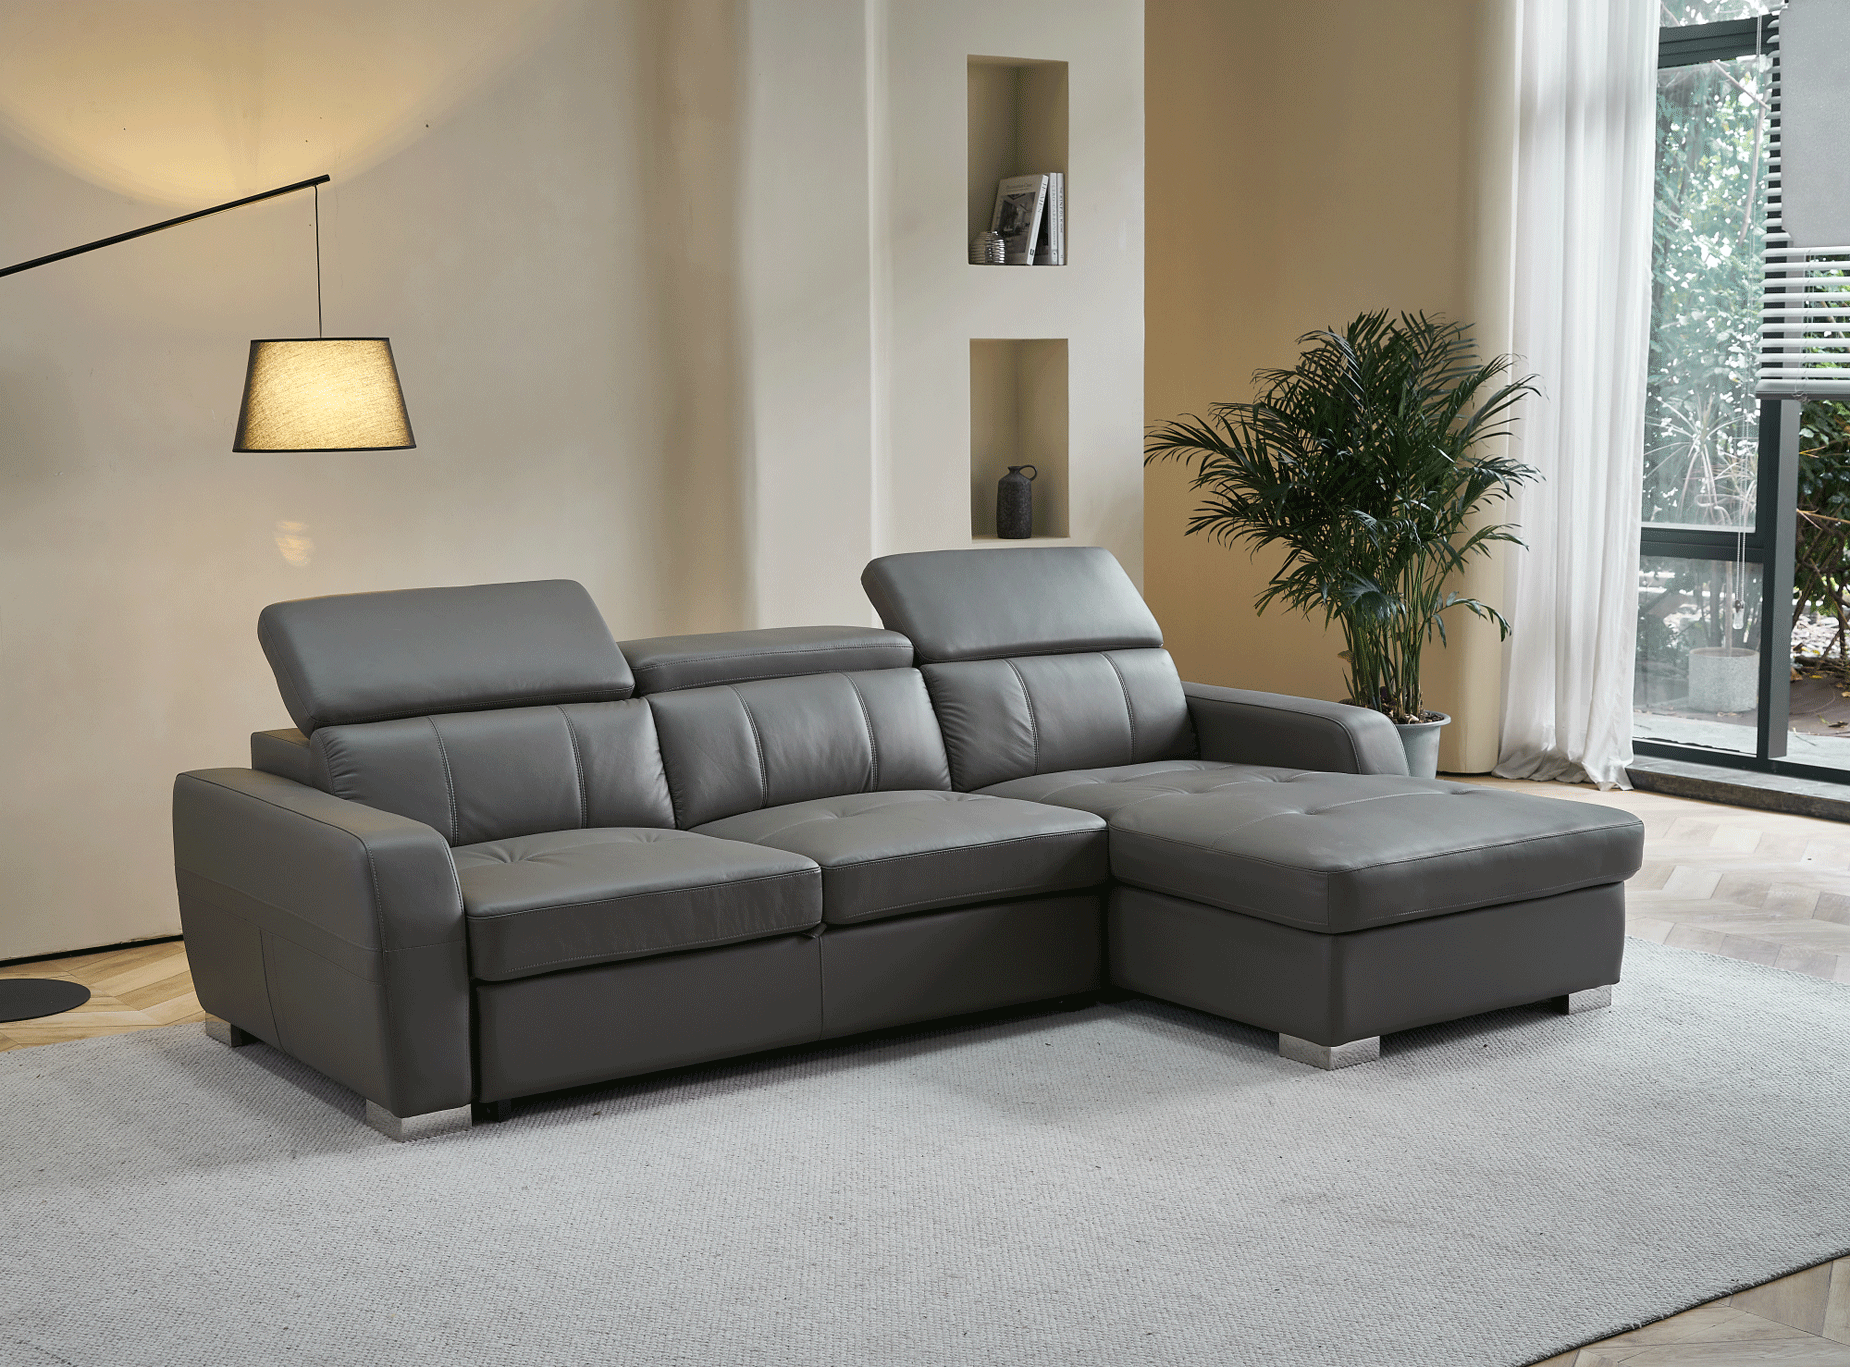 Brands Status Modern Collections, Italy 1822 GREY Sectional Right w/Bed